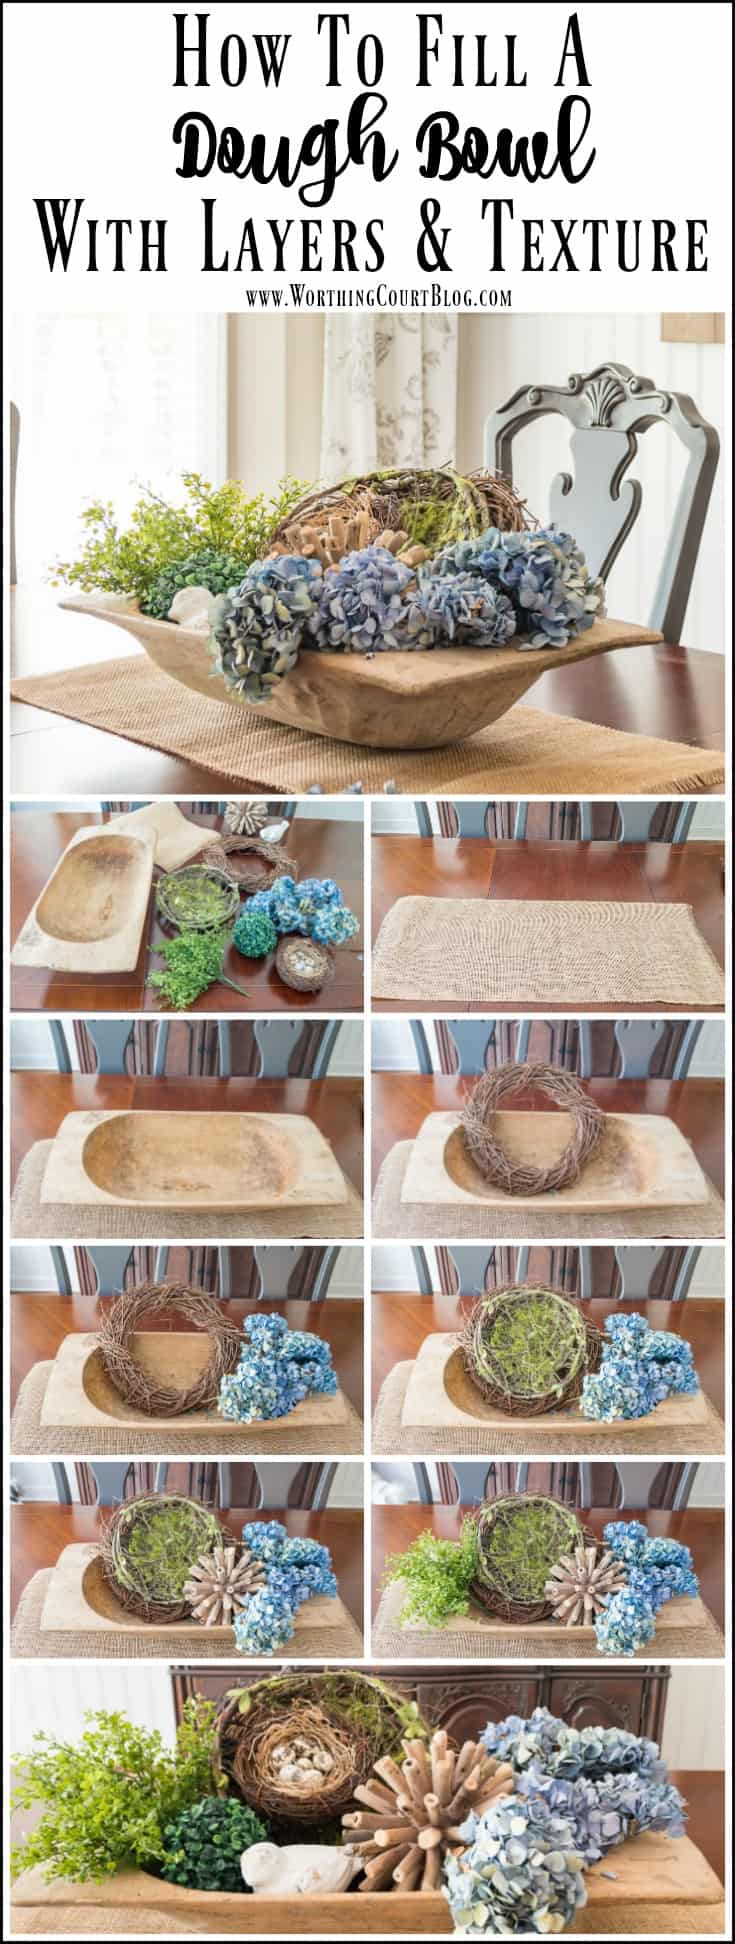 How to fill a large dough bowl with something besides candles or orbs. Step by step directions for how to fill it with layers and texture.